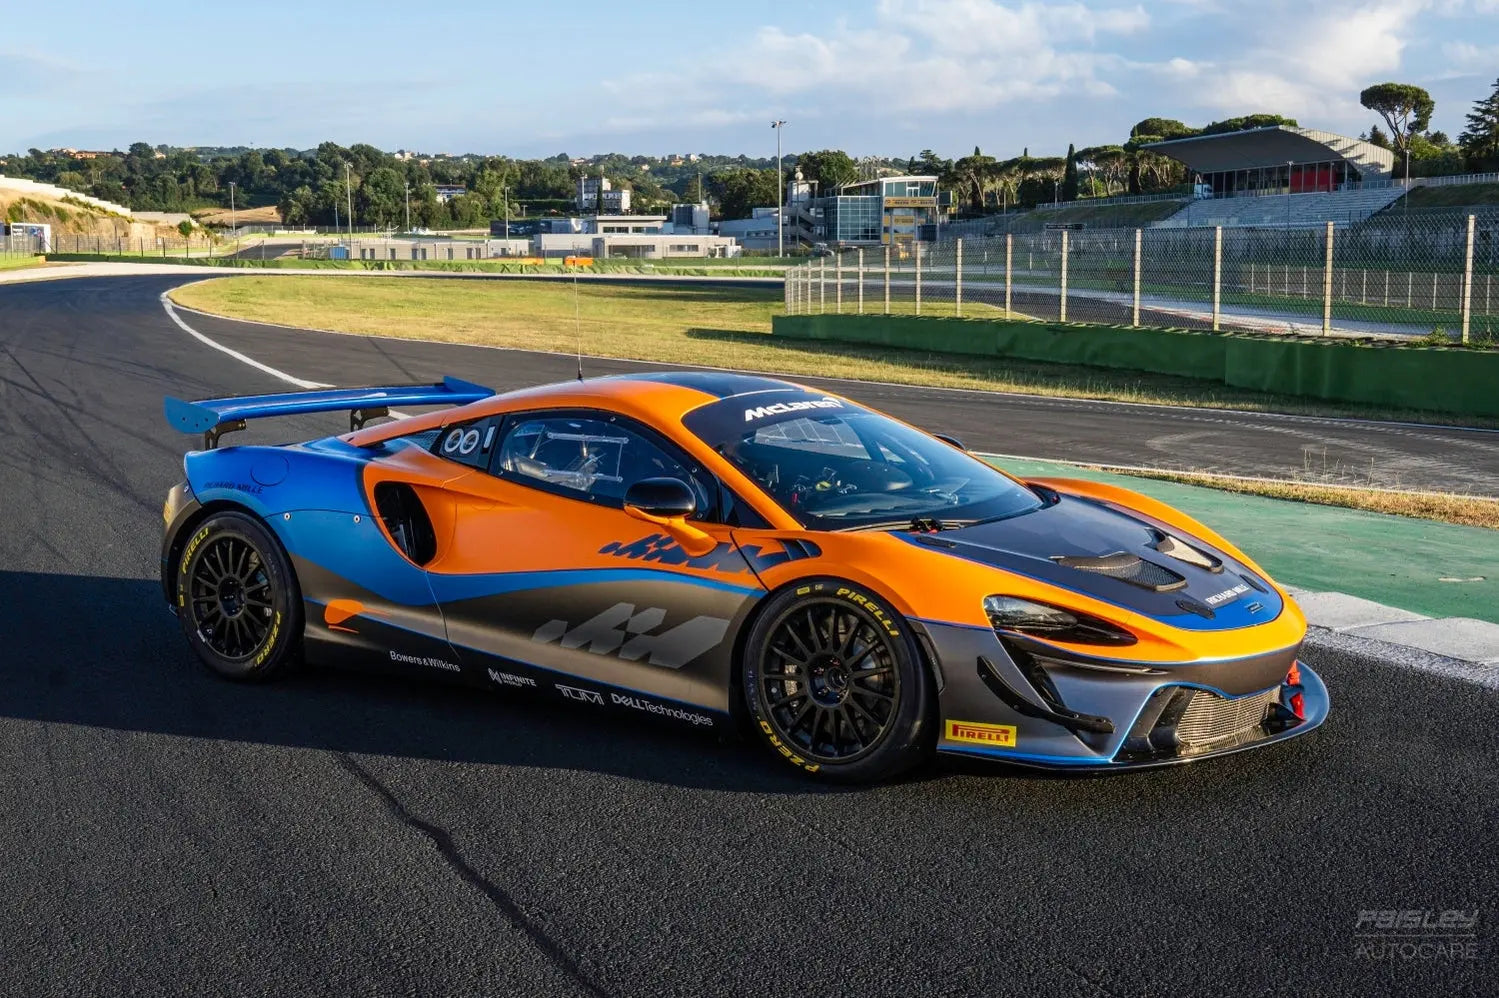 Get to Know the All-New McLaren Artura GT4 Paisley Autocare